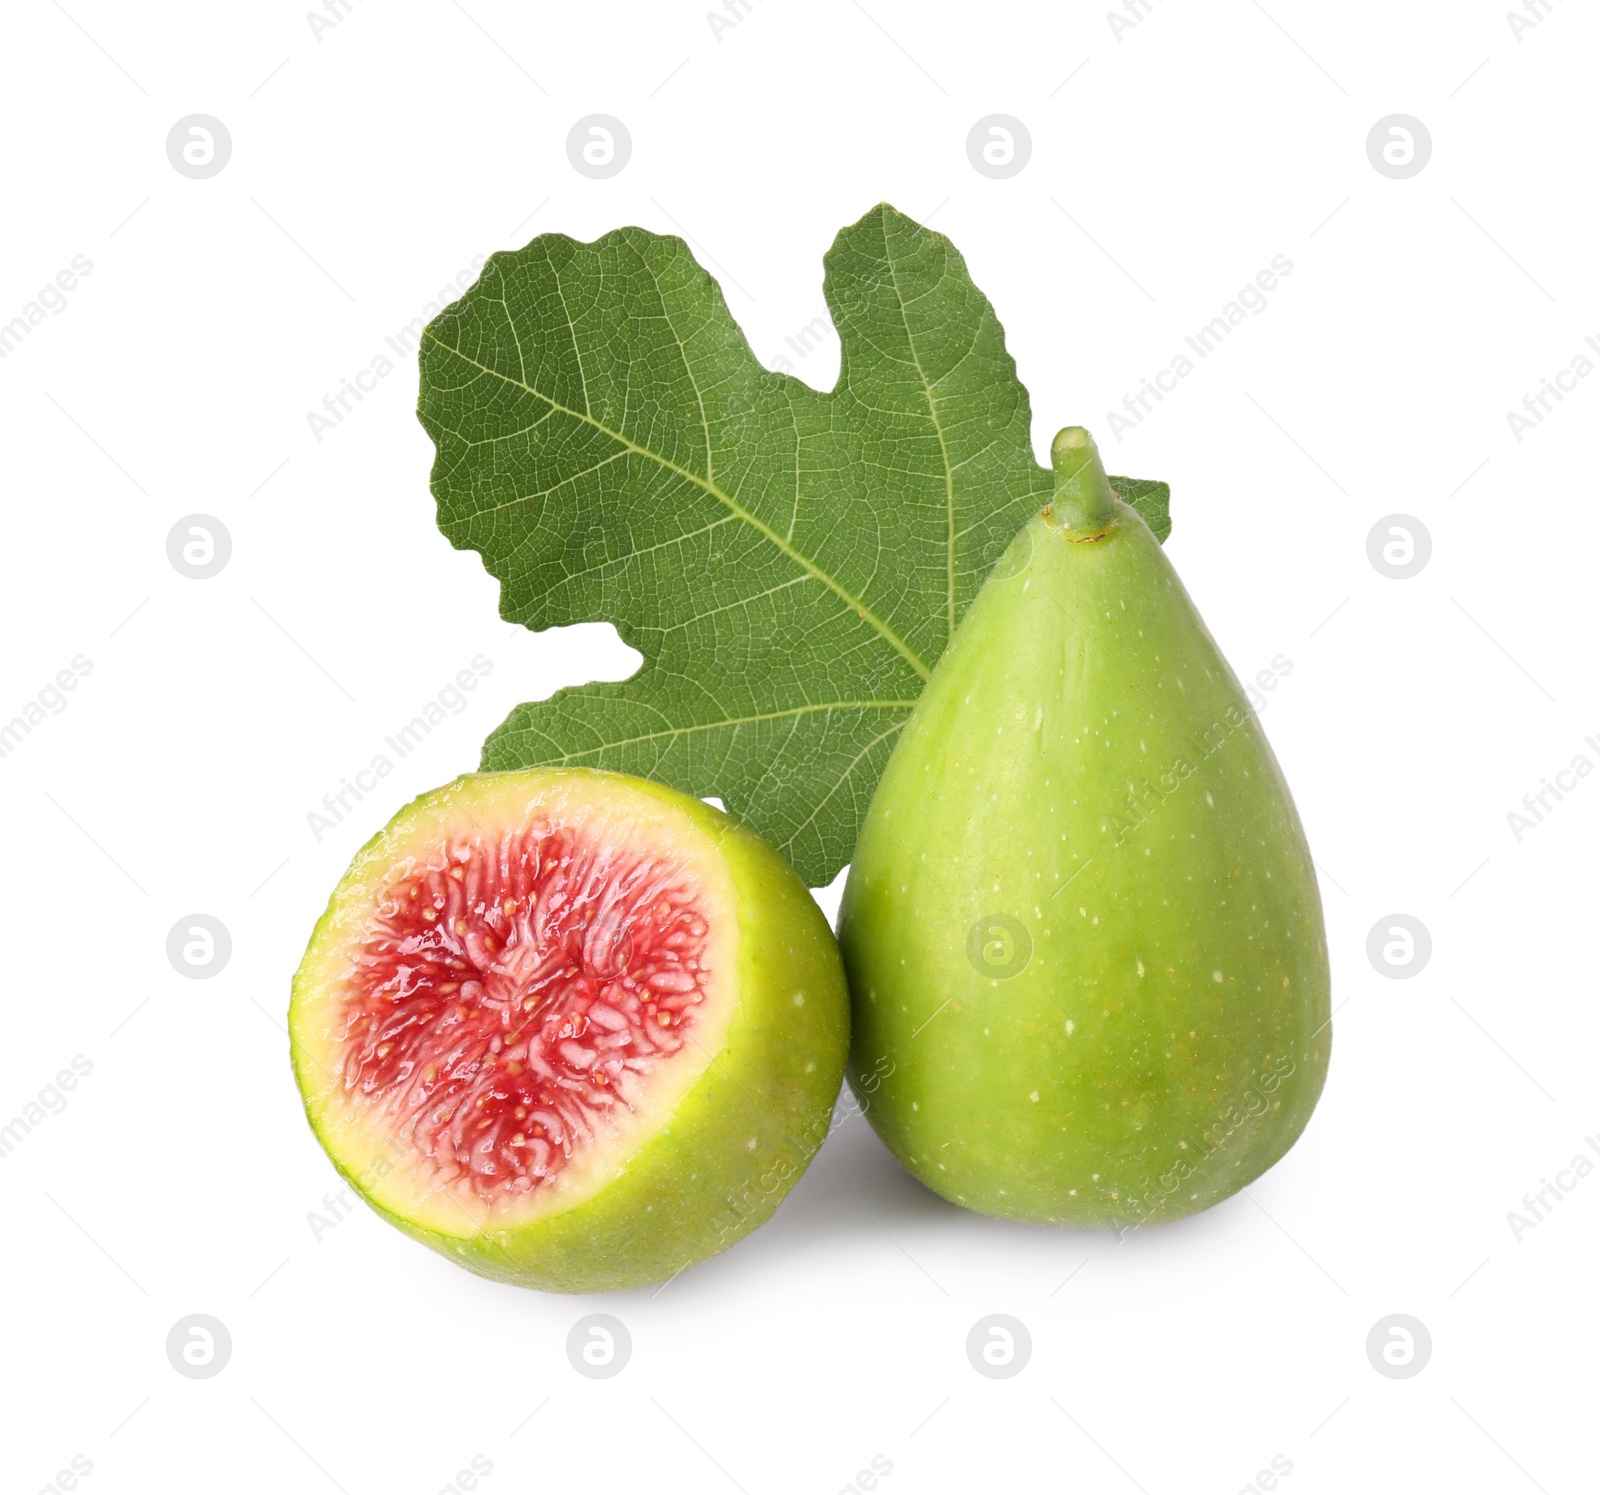 Photo of Cut and whole green figs with leaf isolated on white